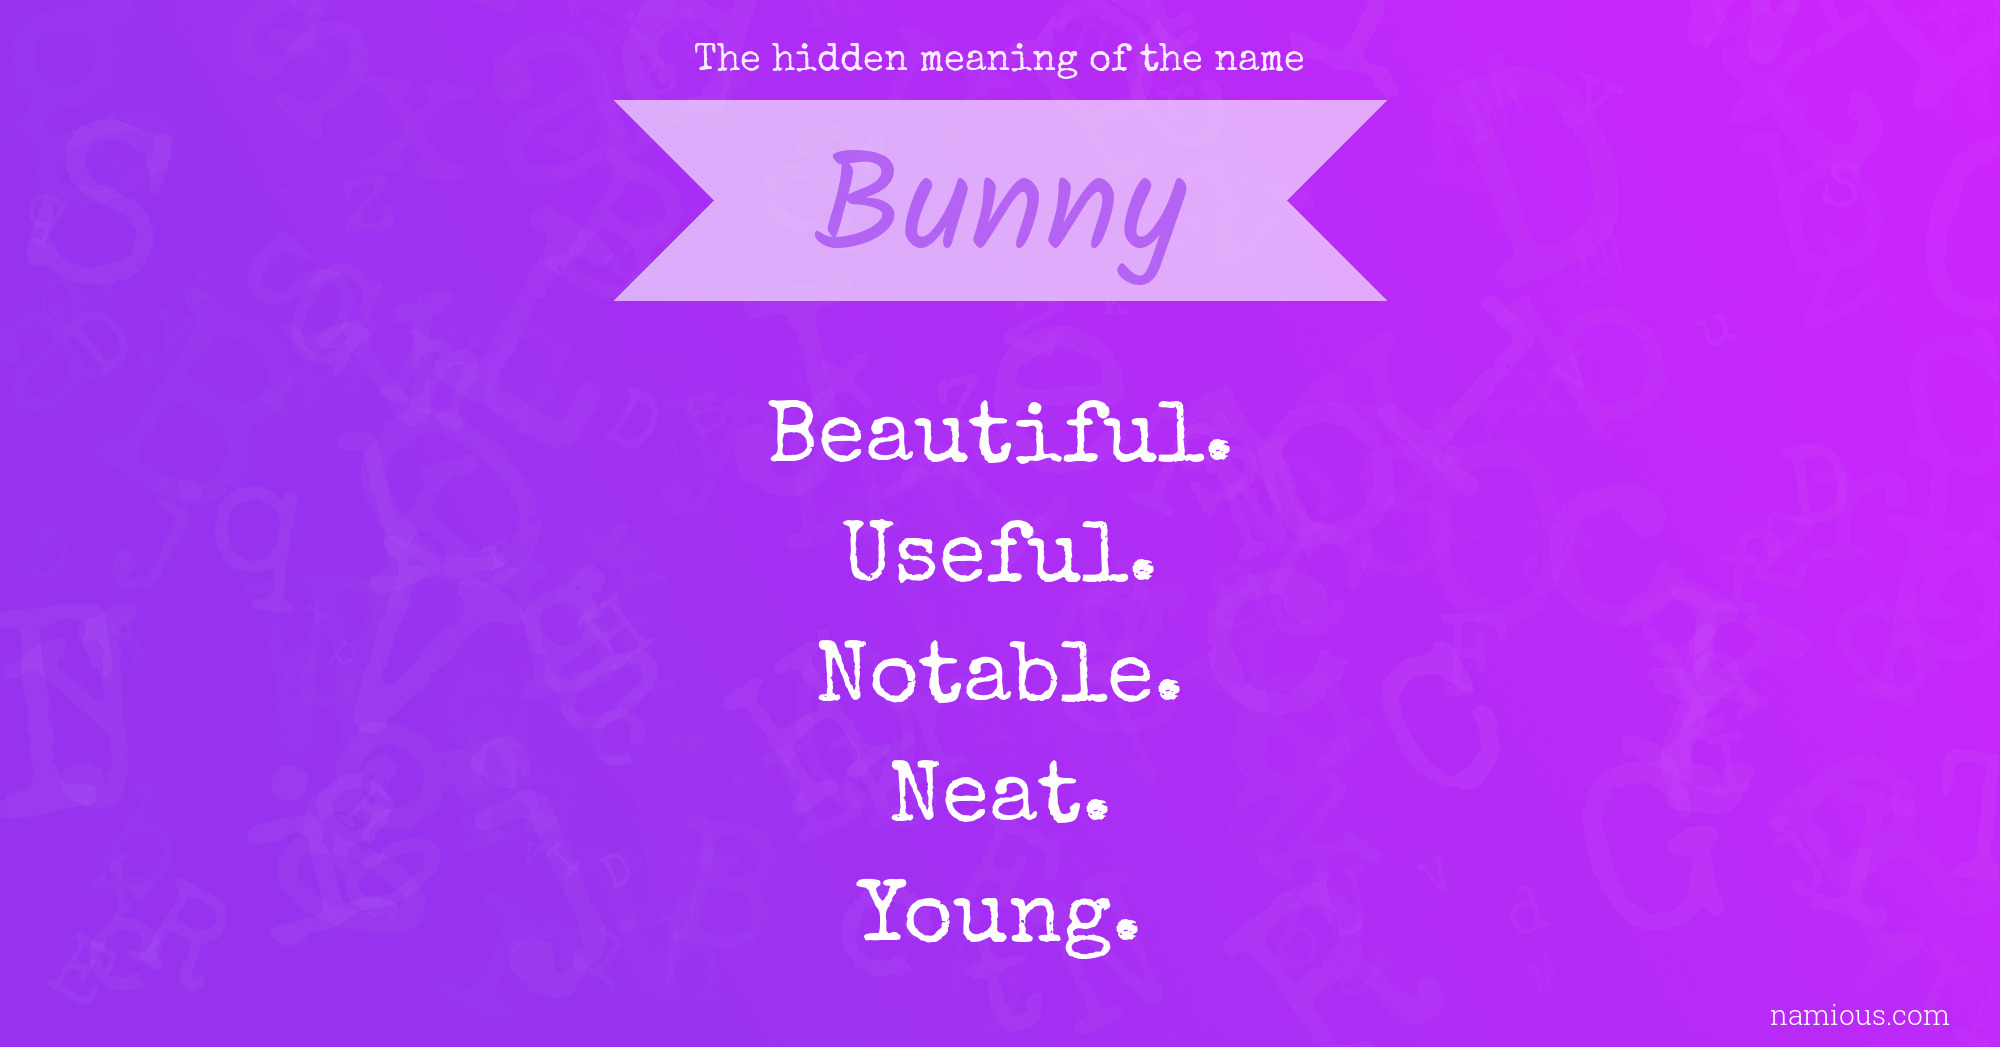 The hidden meaning of the name Bunny